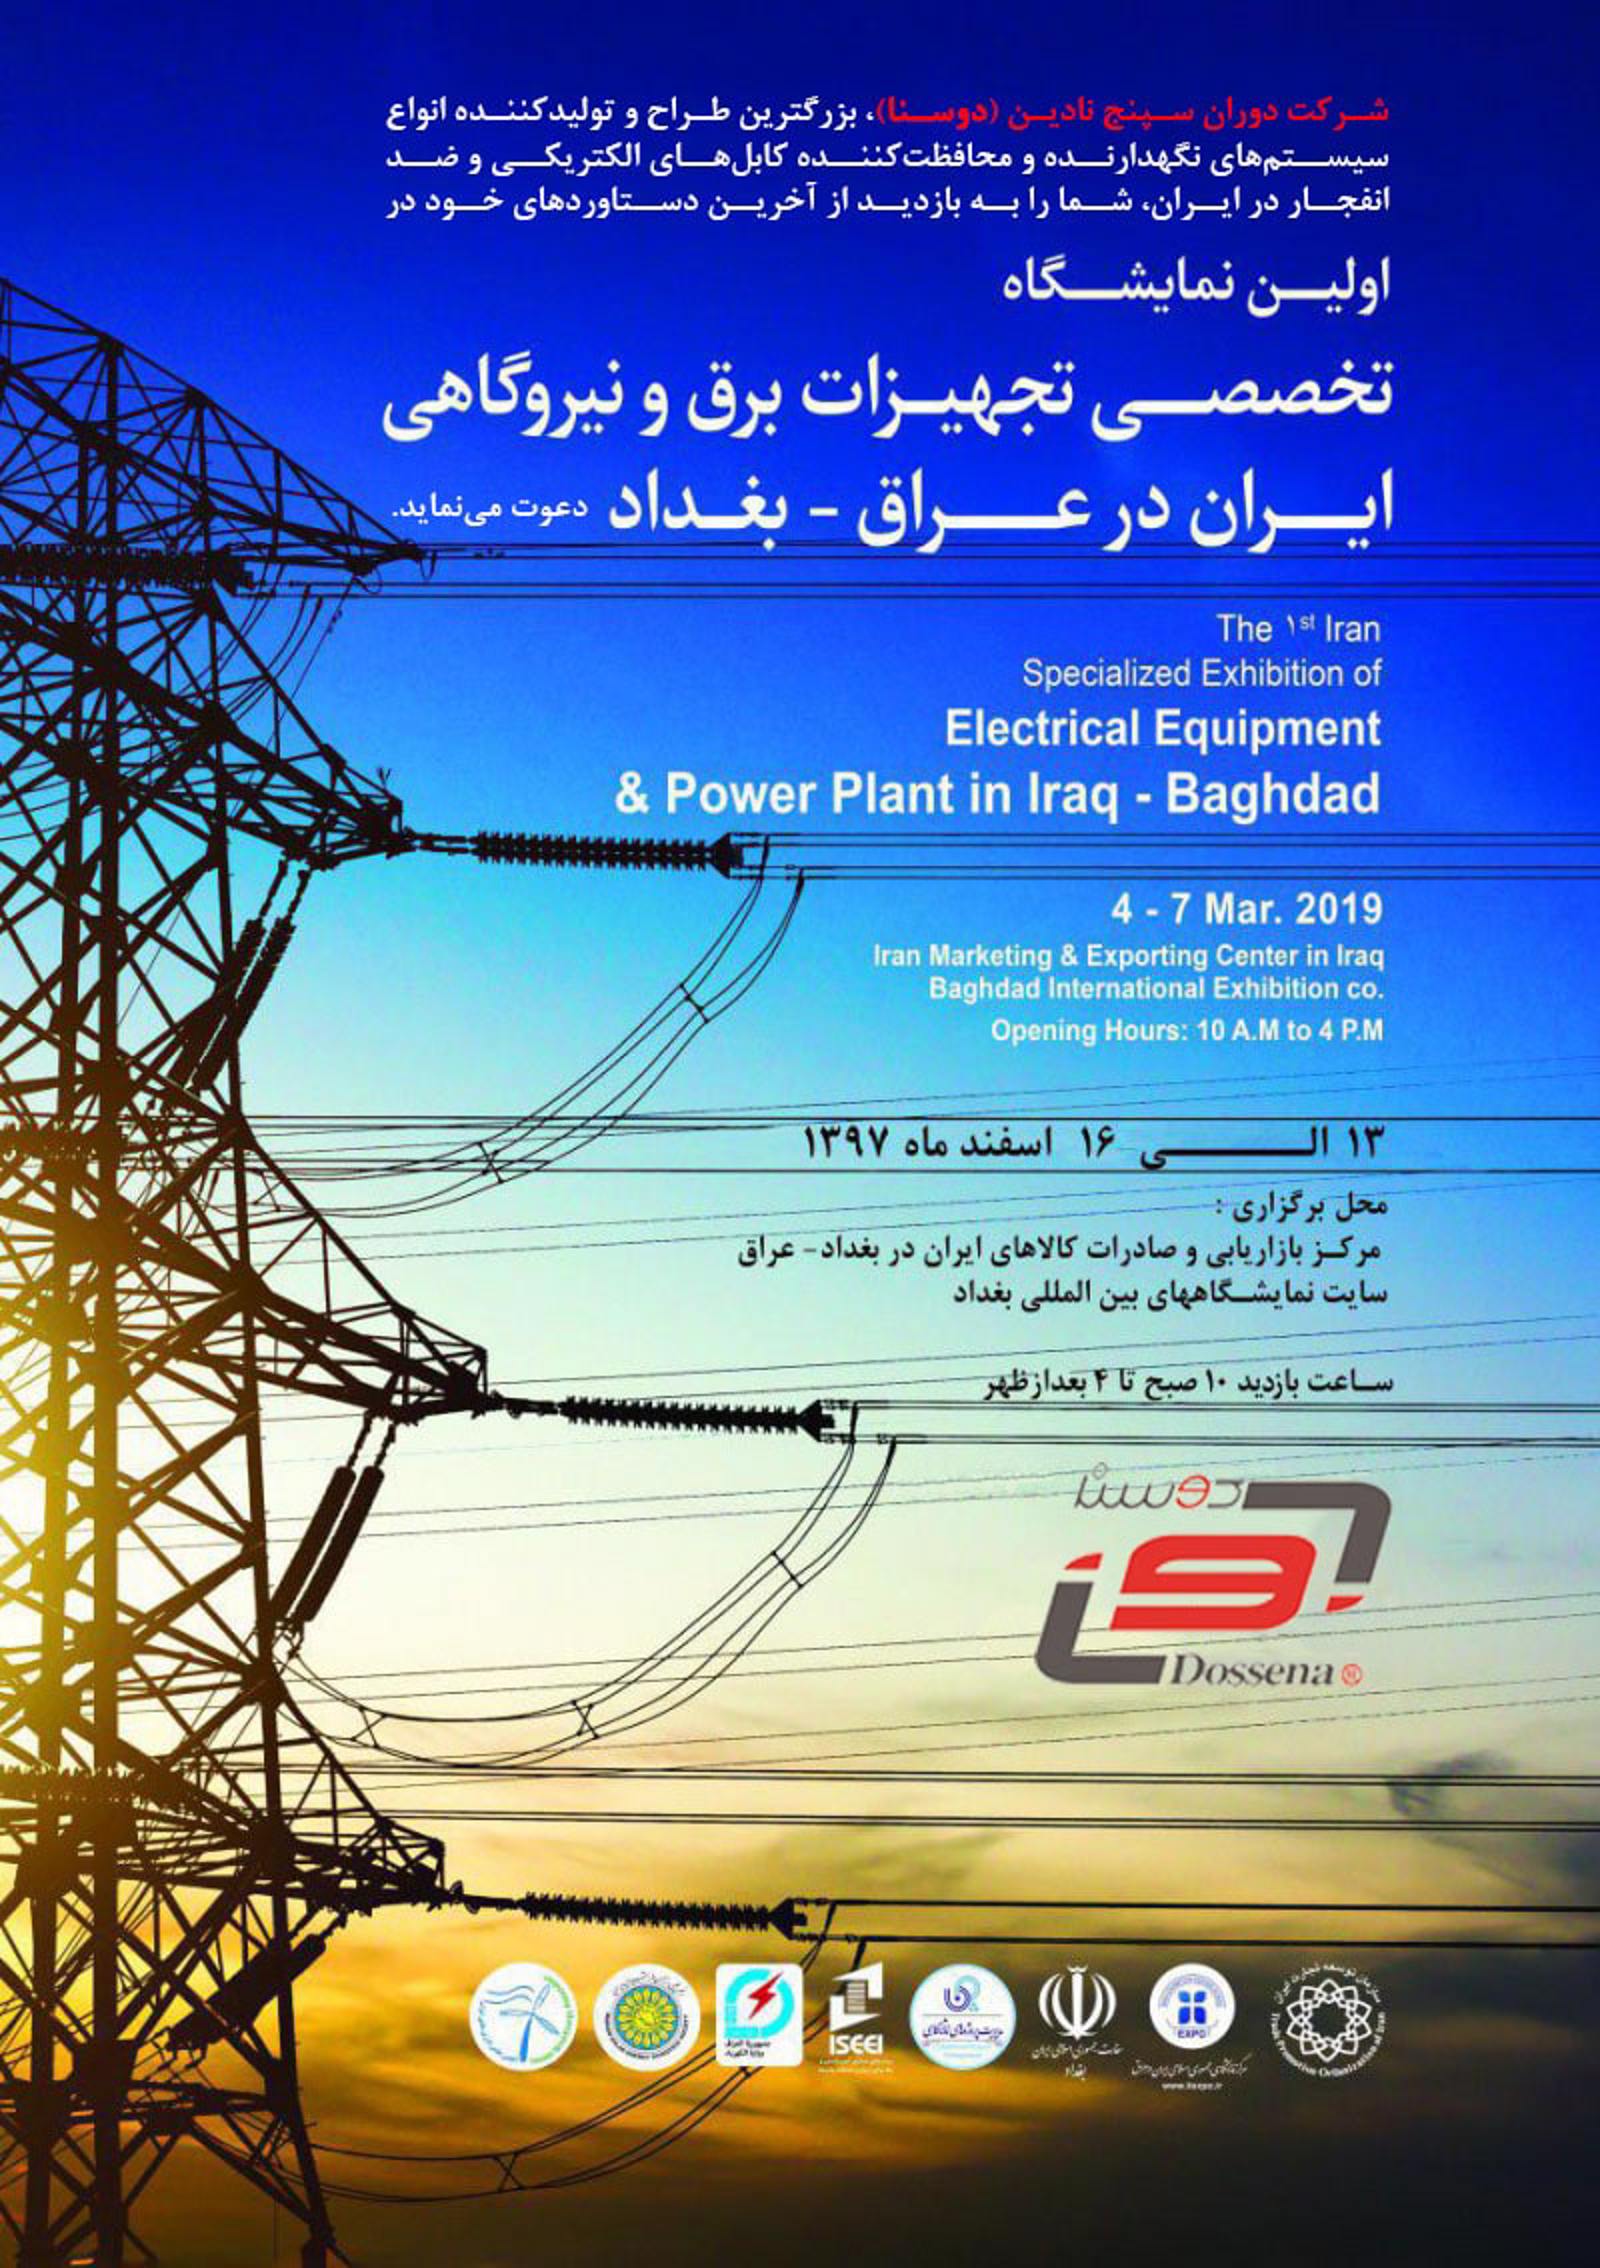 THE 1ST IRAN SPECIALIZED EXHIBITION OF ELECTRICAL EQUIPMENT & POWER PLANT IN IRAQ - BAGHDAD